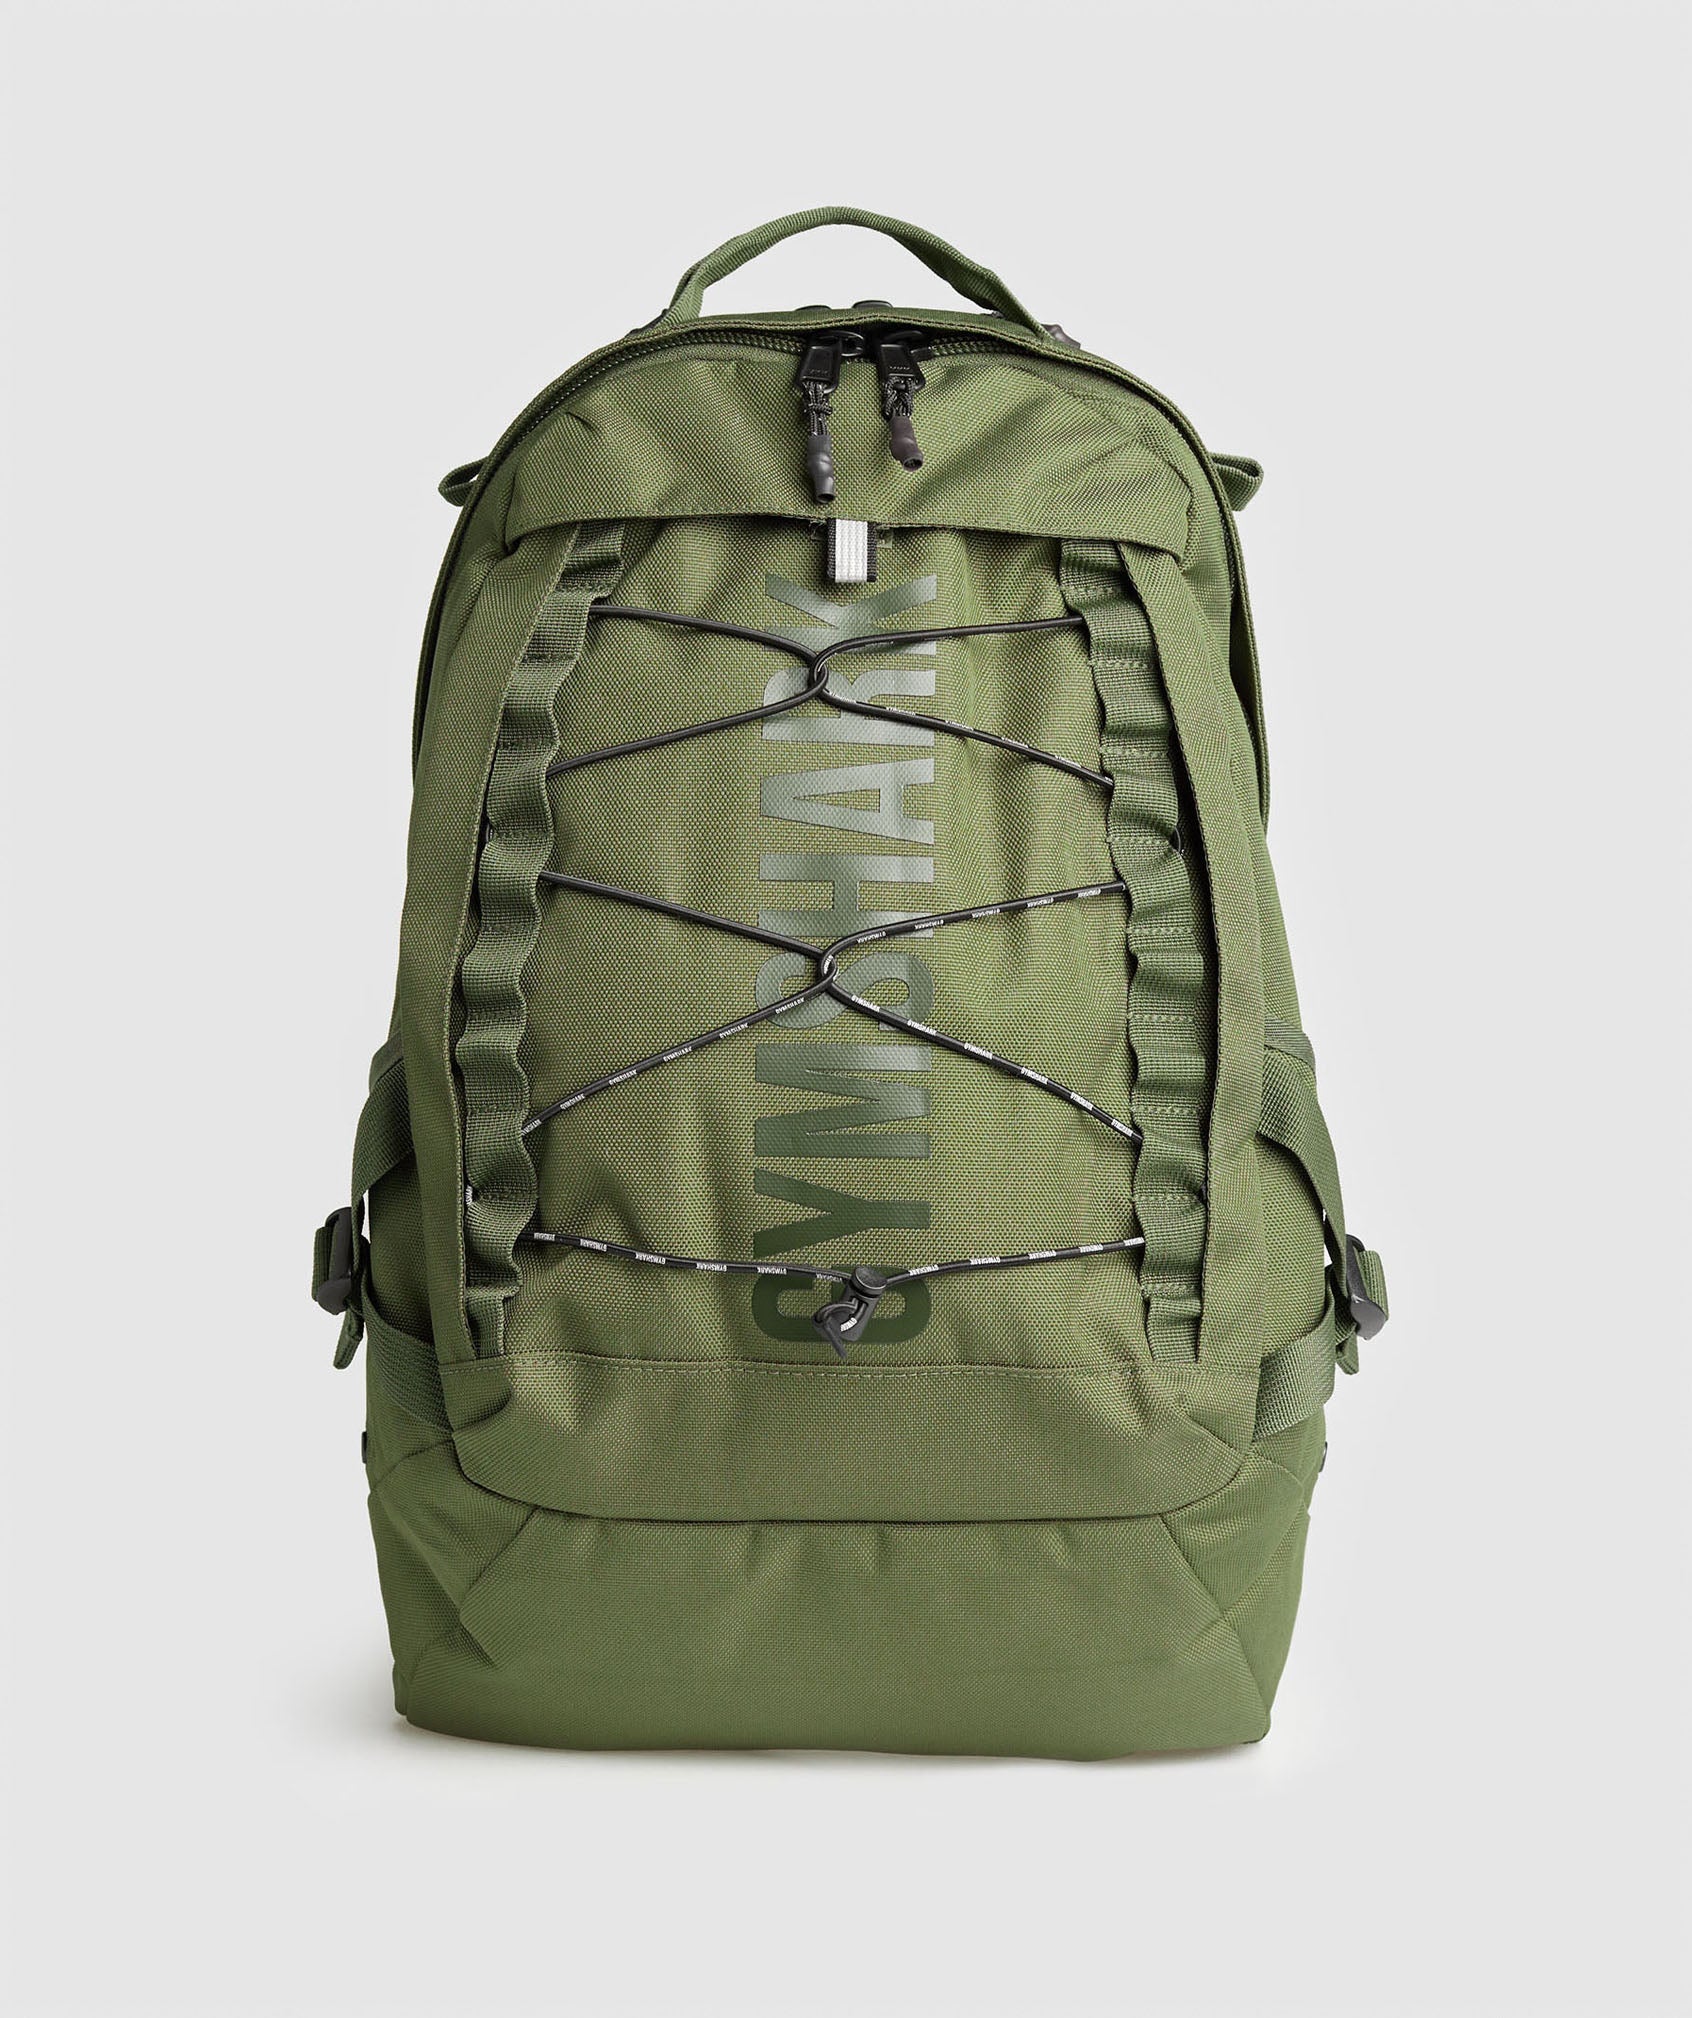 Pursuit Backpack in Green - view 1